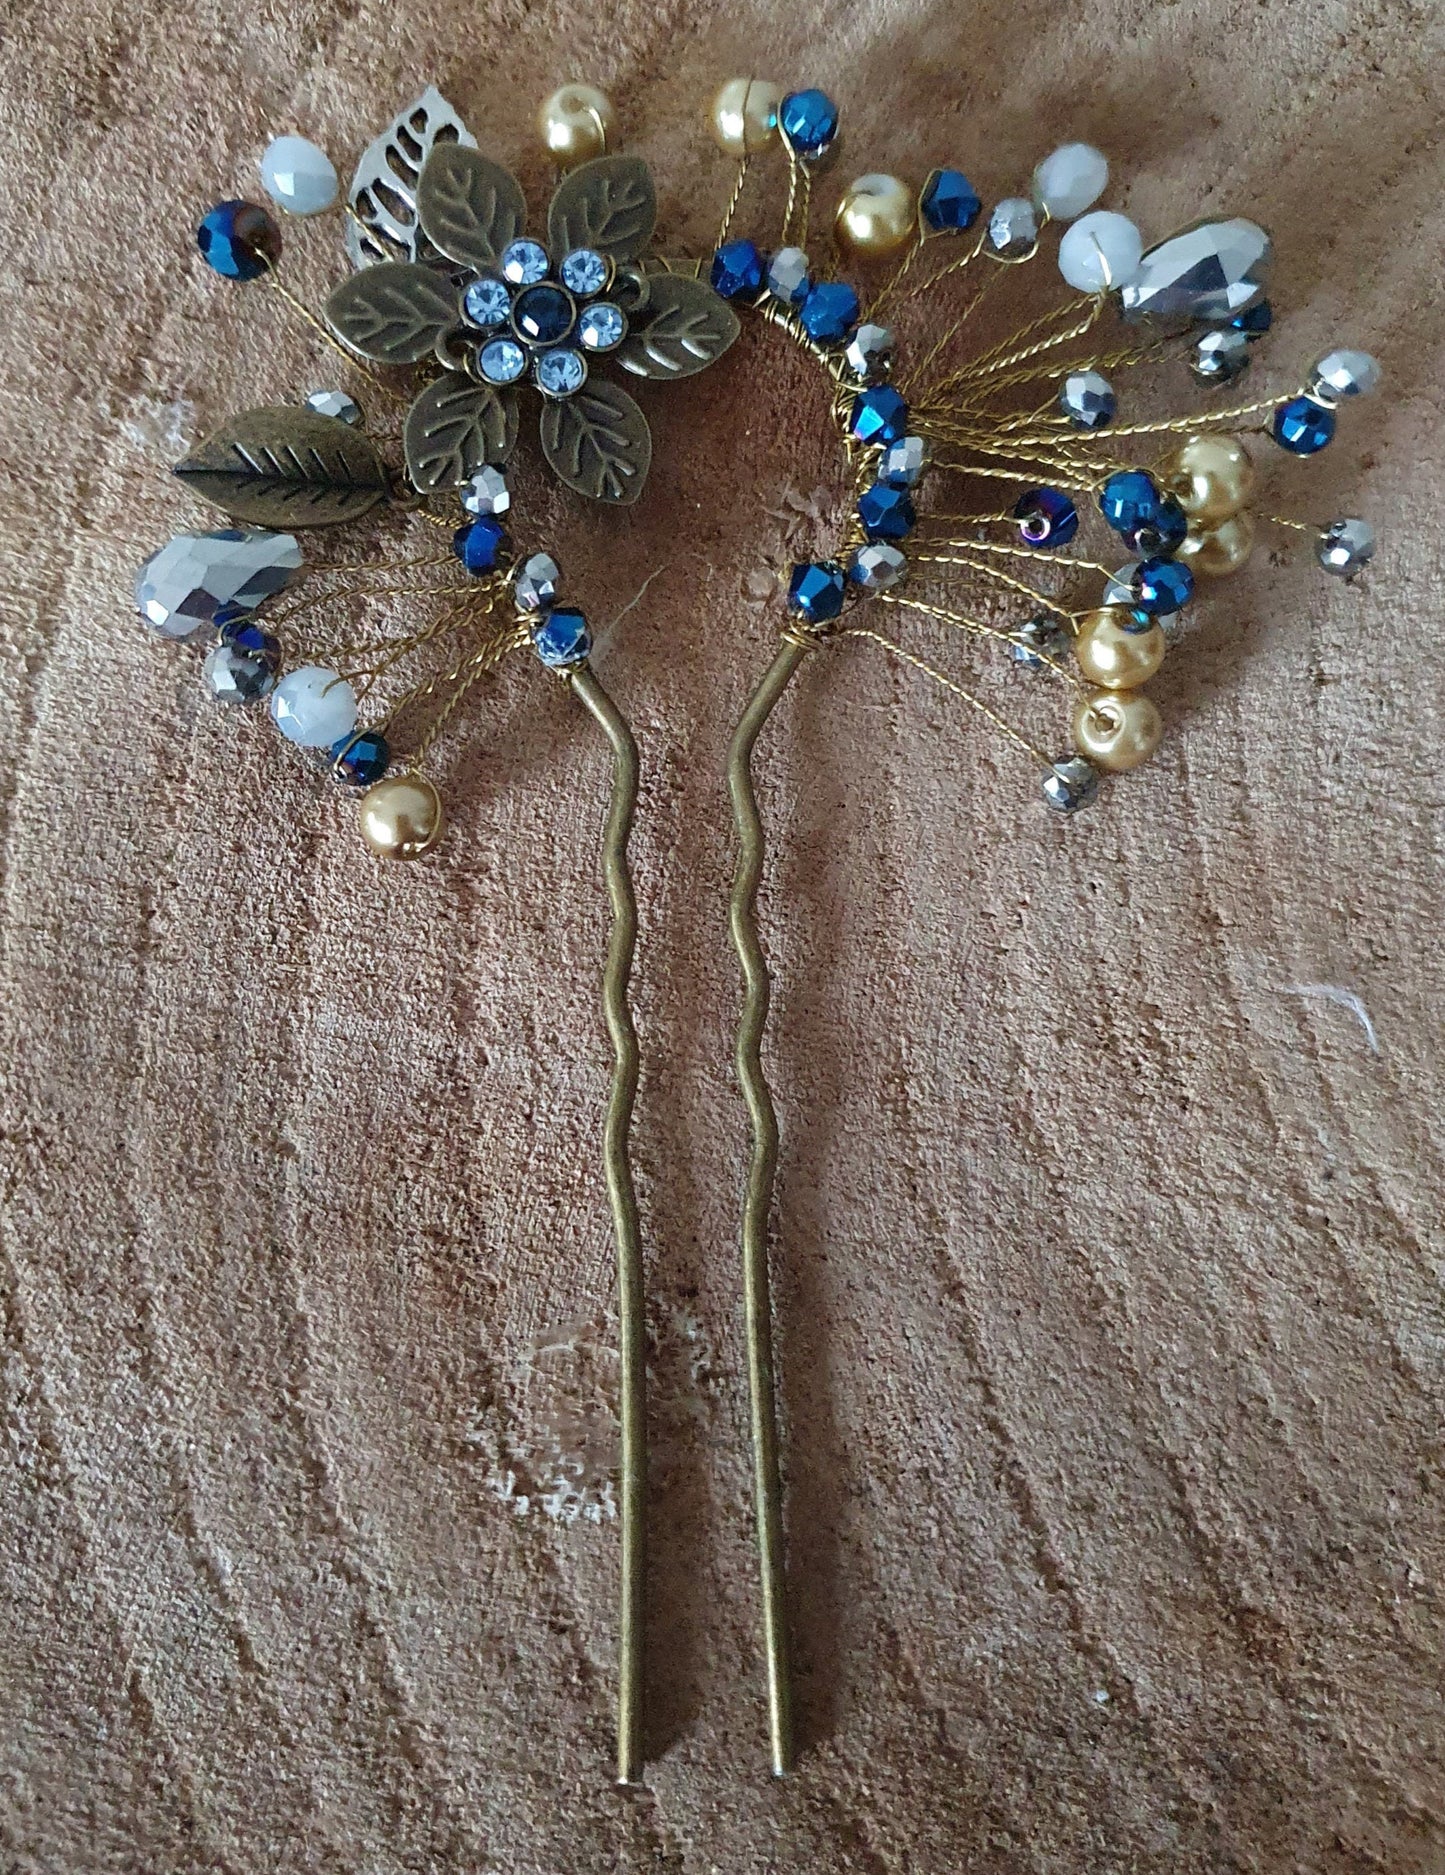 Elegant handmade hair comb with copper-colored metal comb and blue stones - bridal hair comb, hair accessories